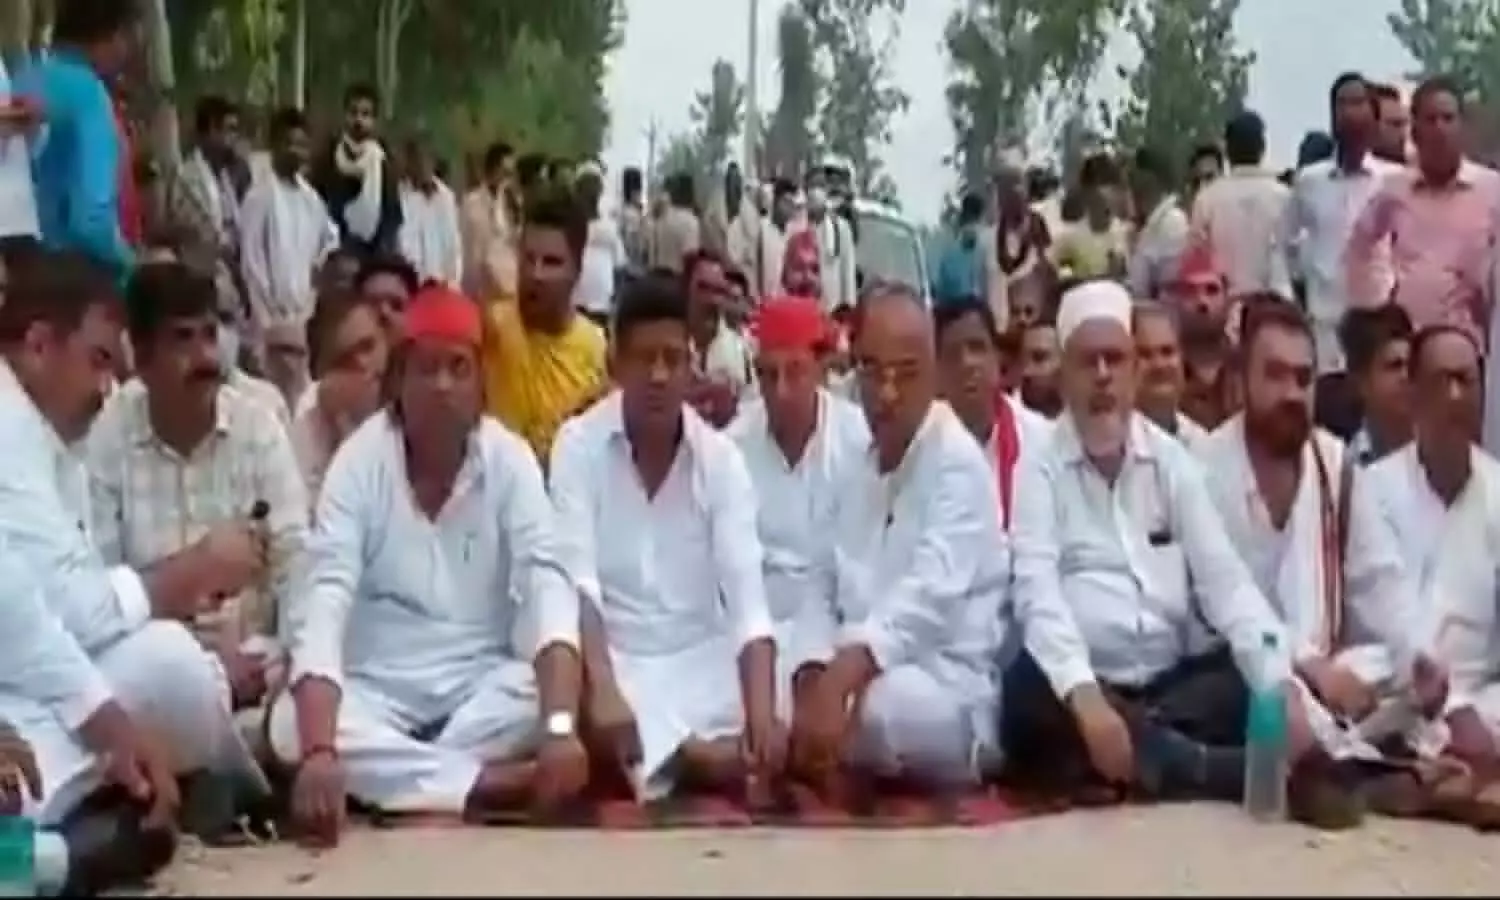 Bareilly, the leaders of the Samajwadi Party have sat on a dharna alleging that the nomination